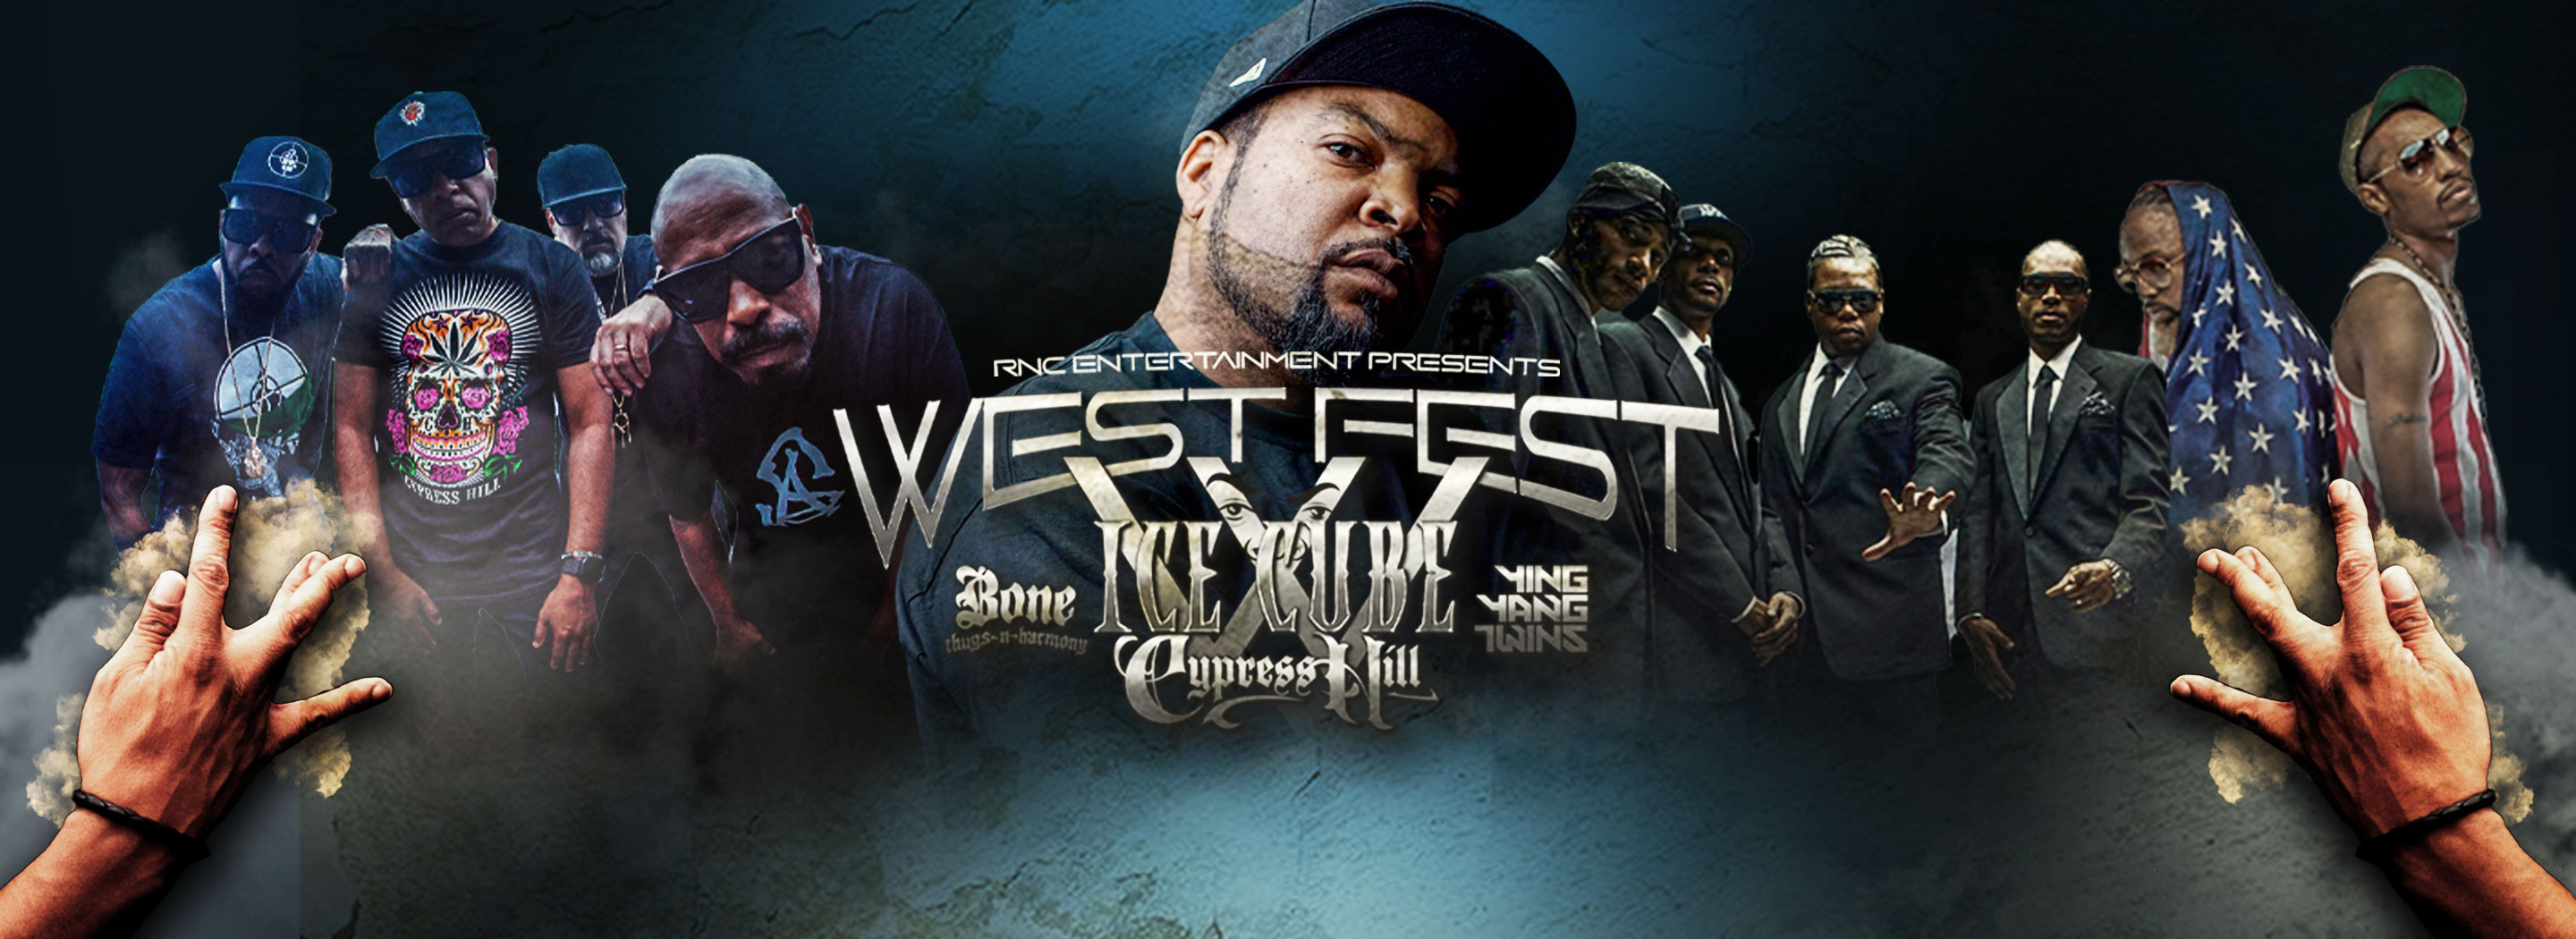 West Fest Featuring Ice Cube and Cypress Hill at INTRUST Bank Arena - AUG 26